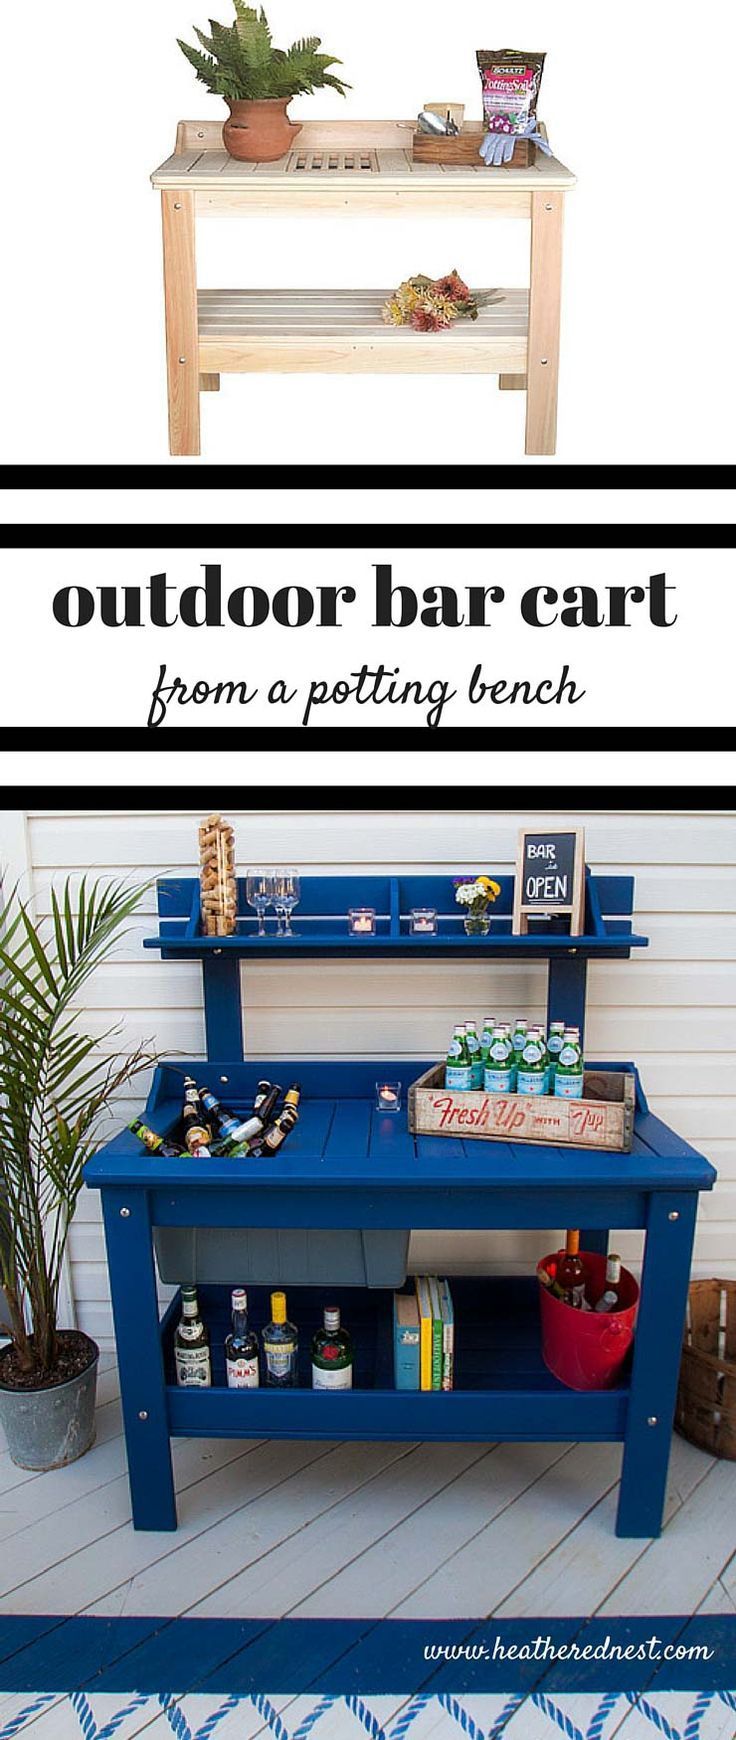 an outdoor potting table can be turned into the patio outdoor bar cart! Check out this one from www.heatherednest… what a fun